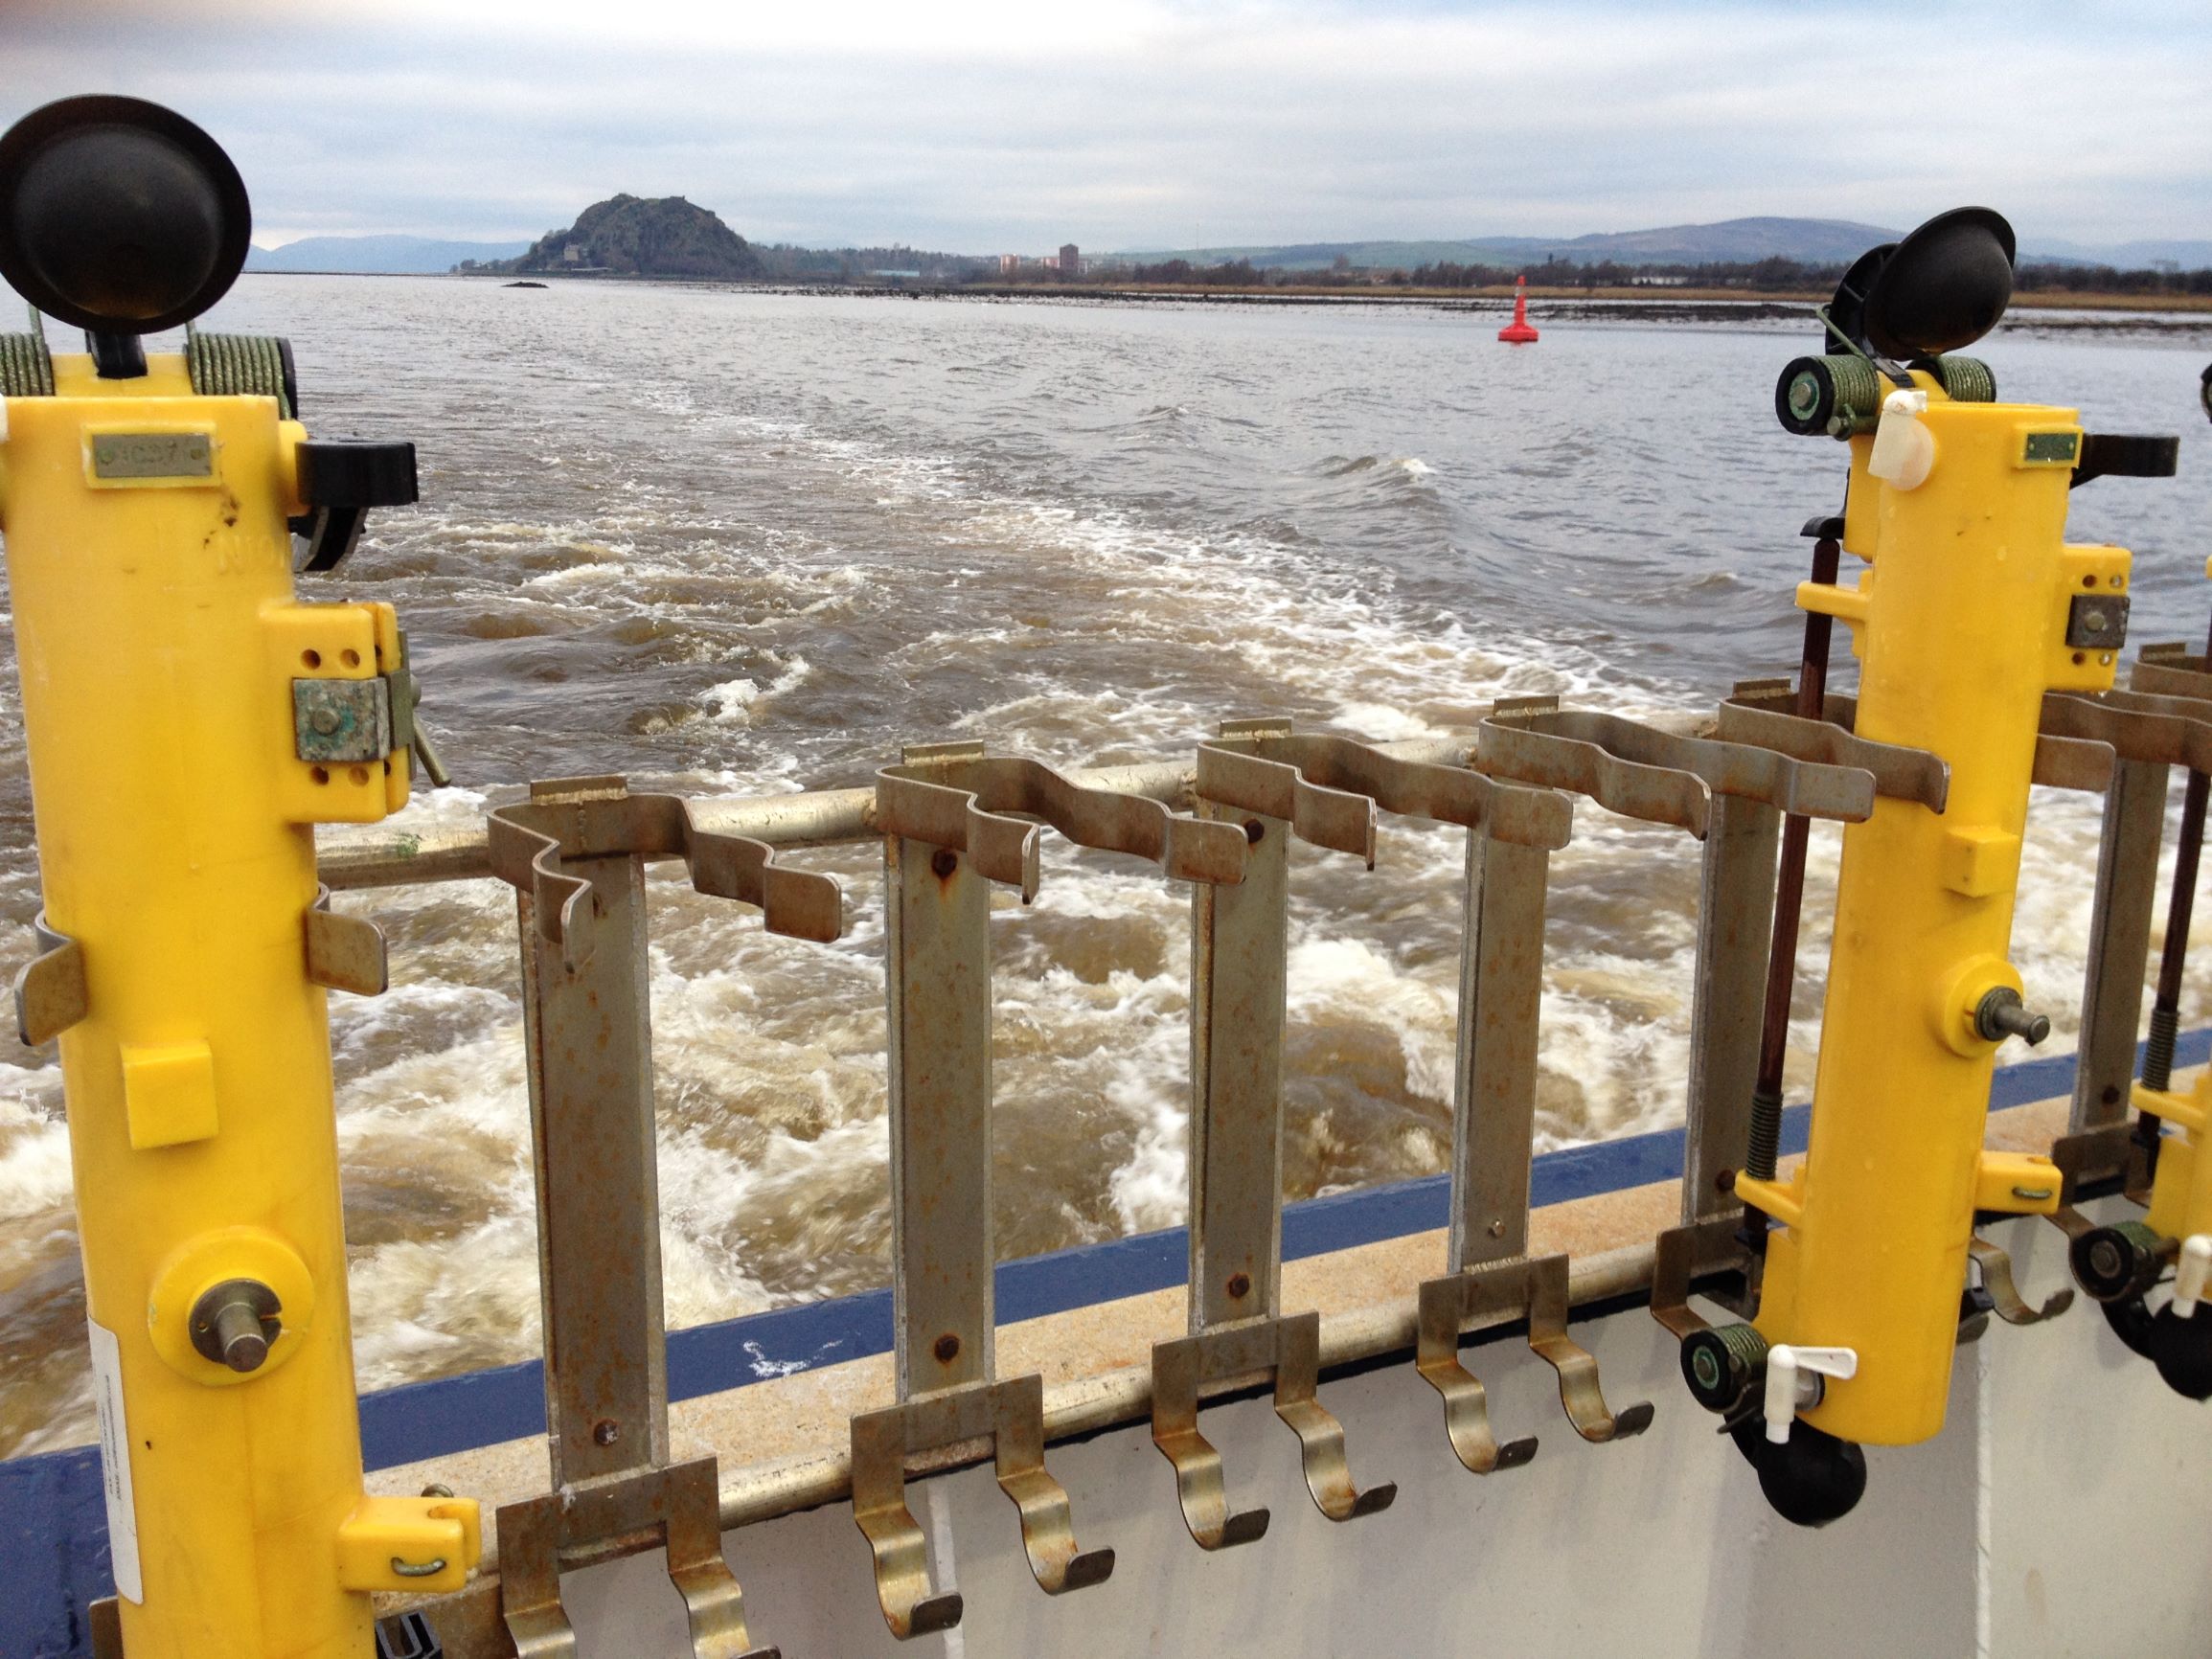 Figure 1: Water samplers used for taking samples in the Clyde estuary